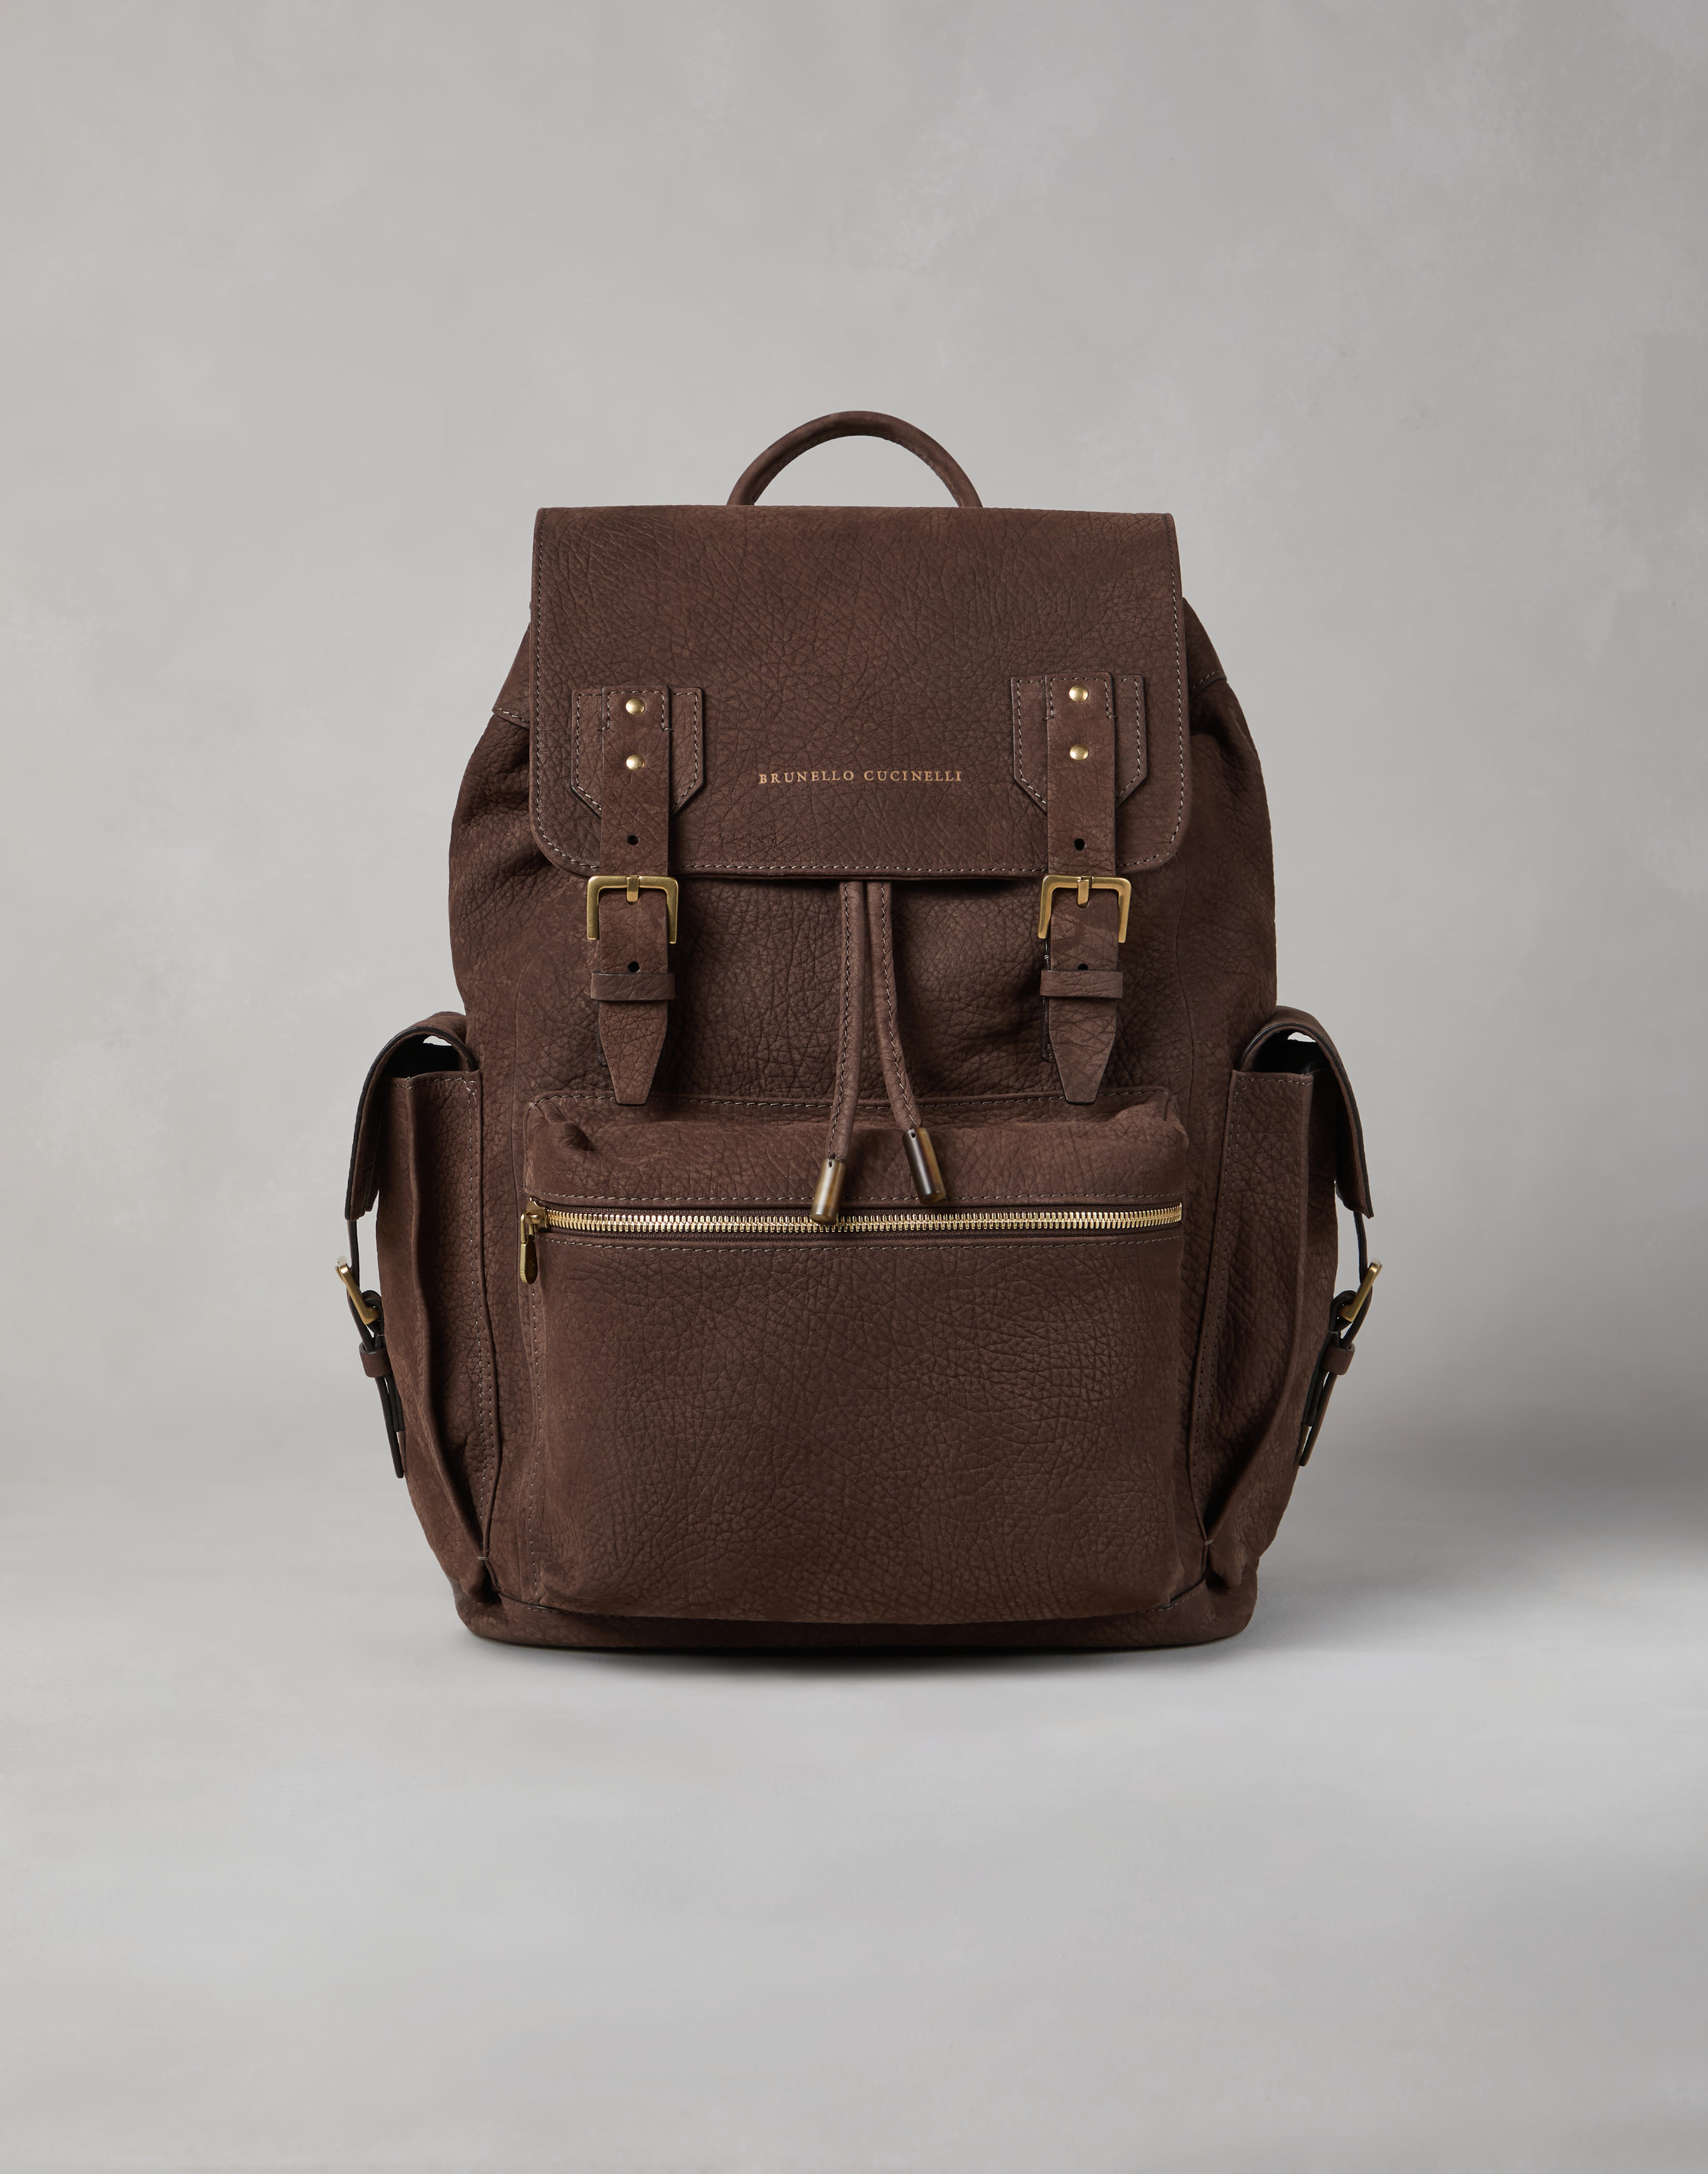 Backpack - Front view